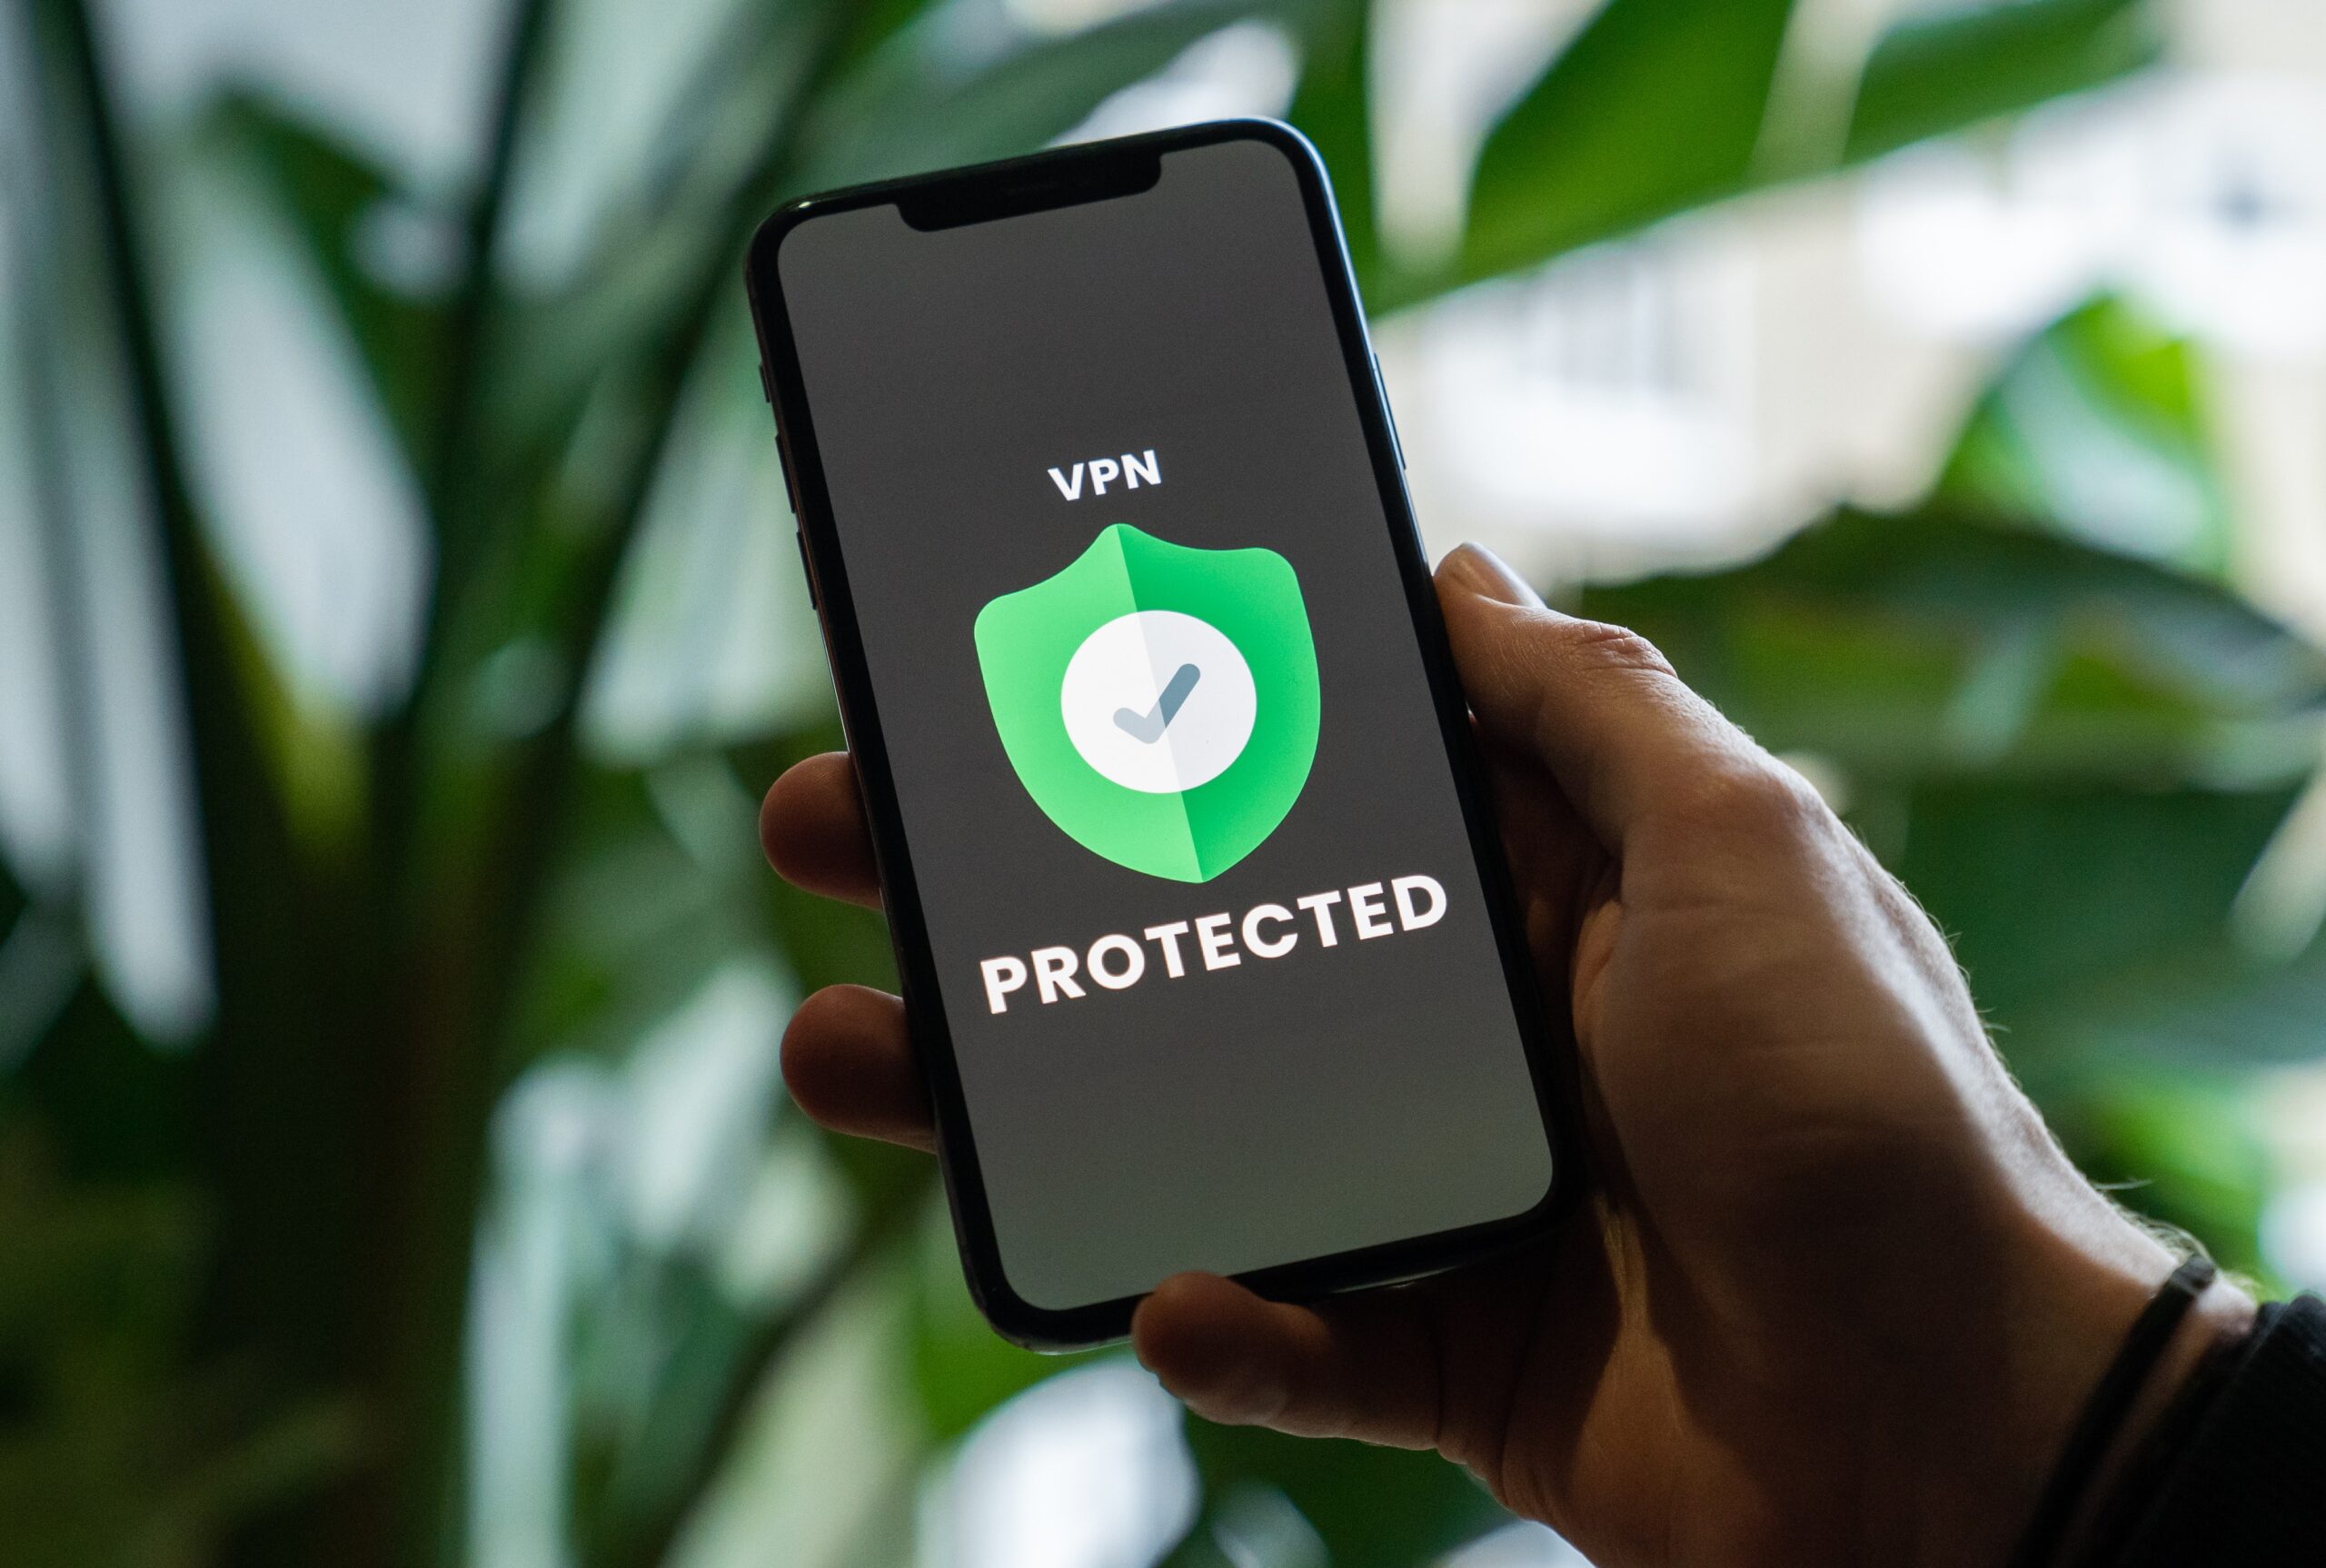 Person holding iPhone with VPN service enabled in hand